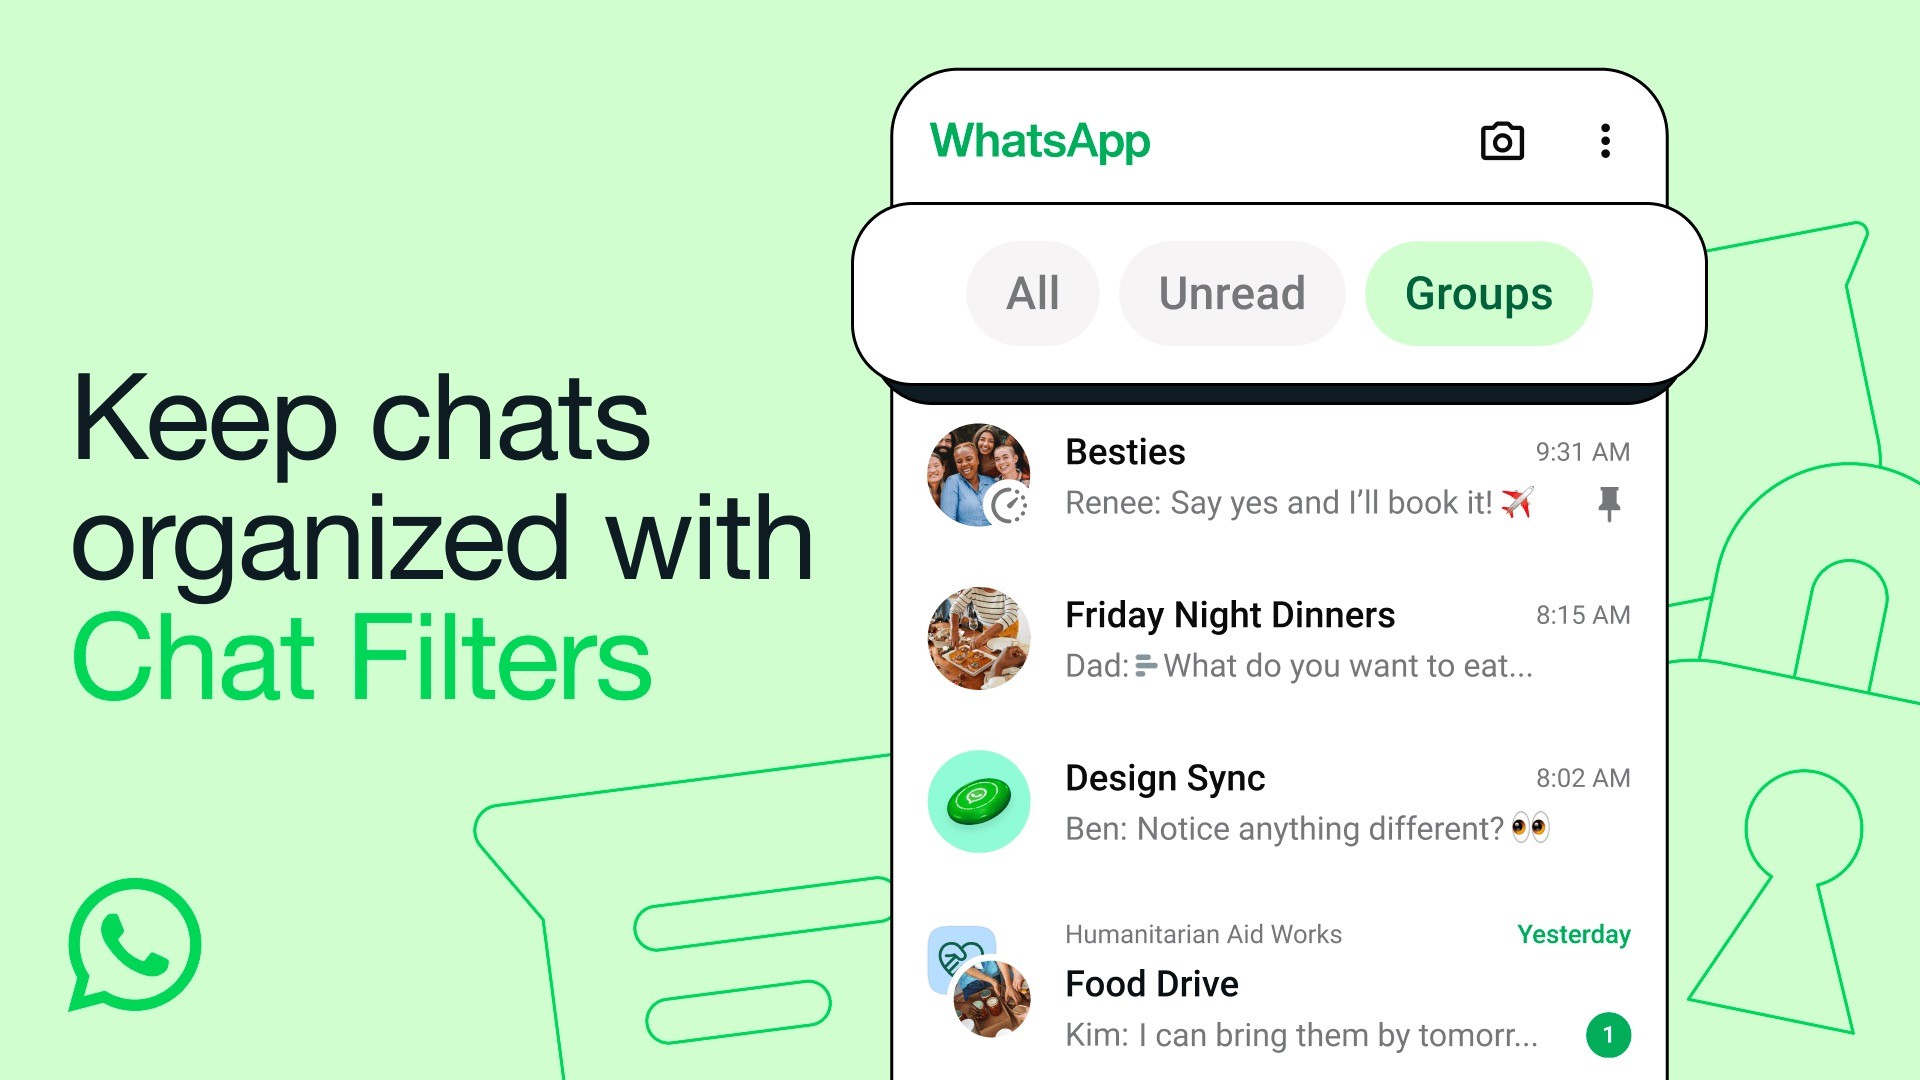 photo of WhatsApp Rolls Out Chat Filters to Help Find Conversations Faster image